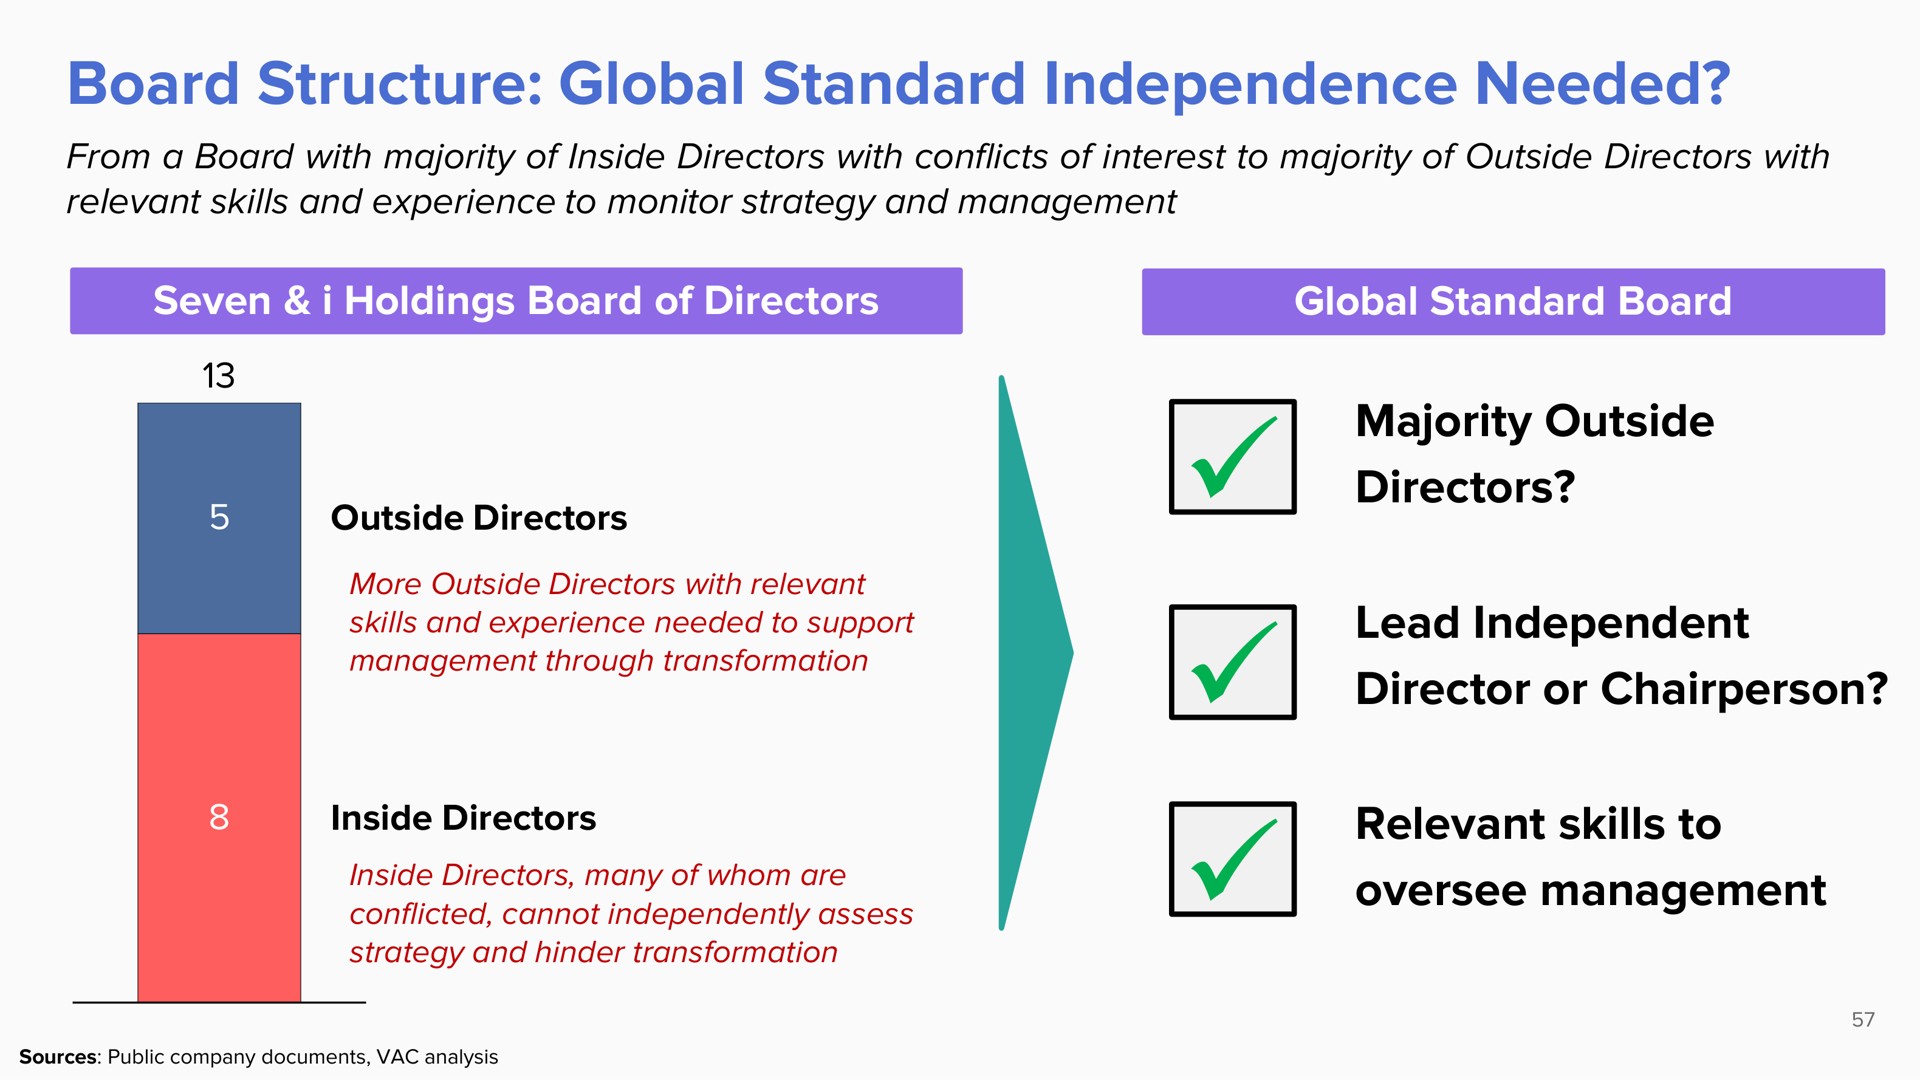 board structure global standard independence needed majority outside directors lead independent director or relevant skills to oversee management | ValueAct Capital